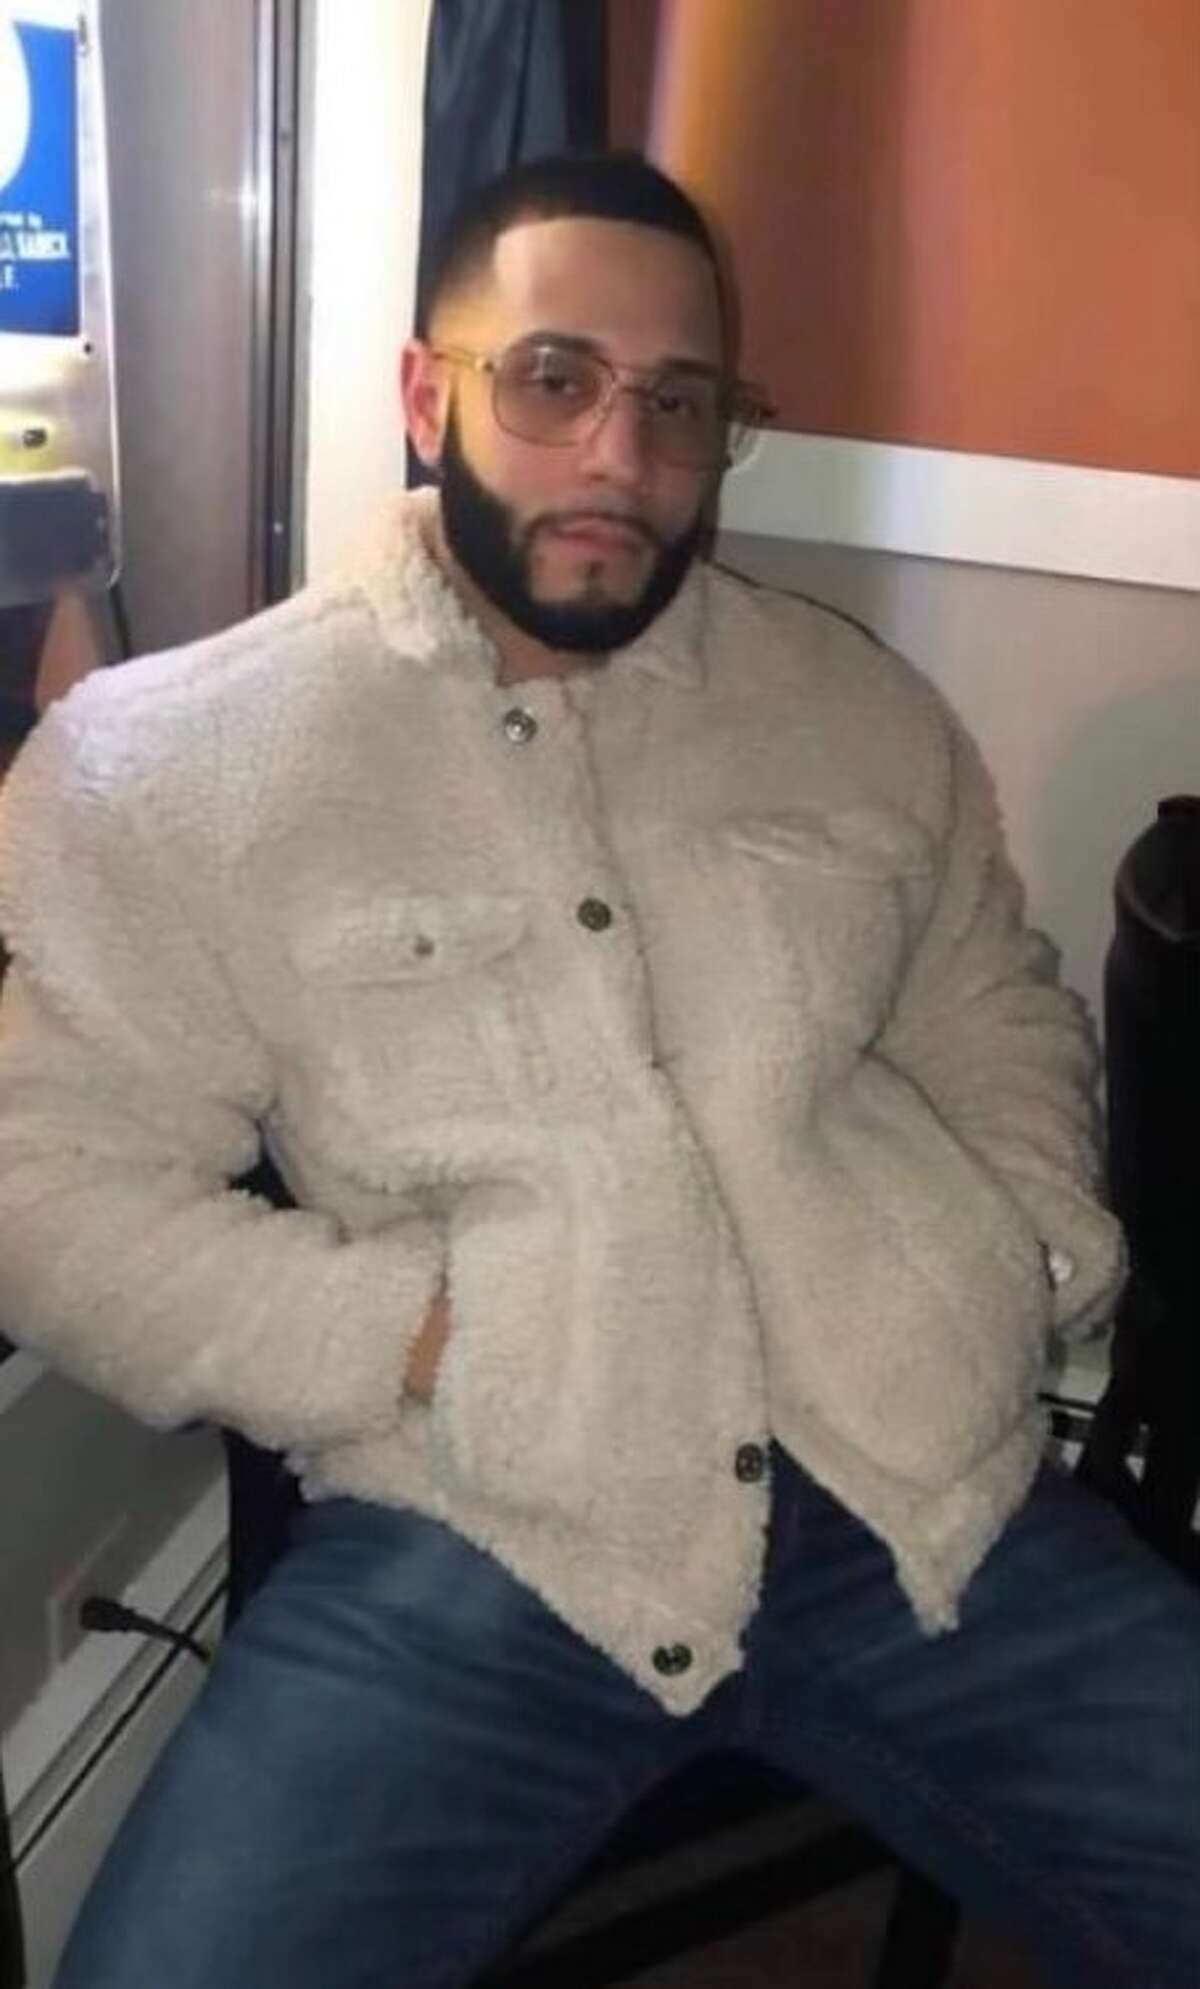 The family of Eros Diaz, who was shot and killed in Hartford in 2019, is offering a $500,000 reward for information leading to the arrest and conviction of those responsible.